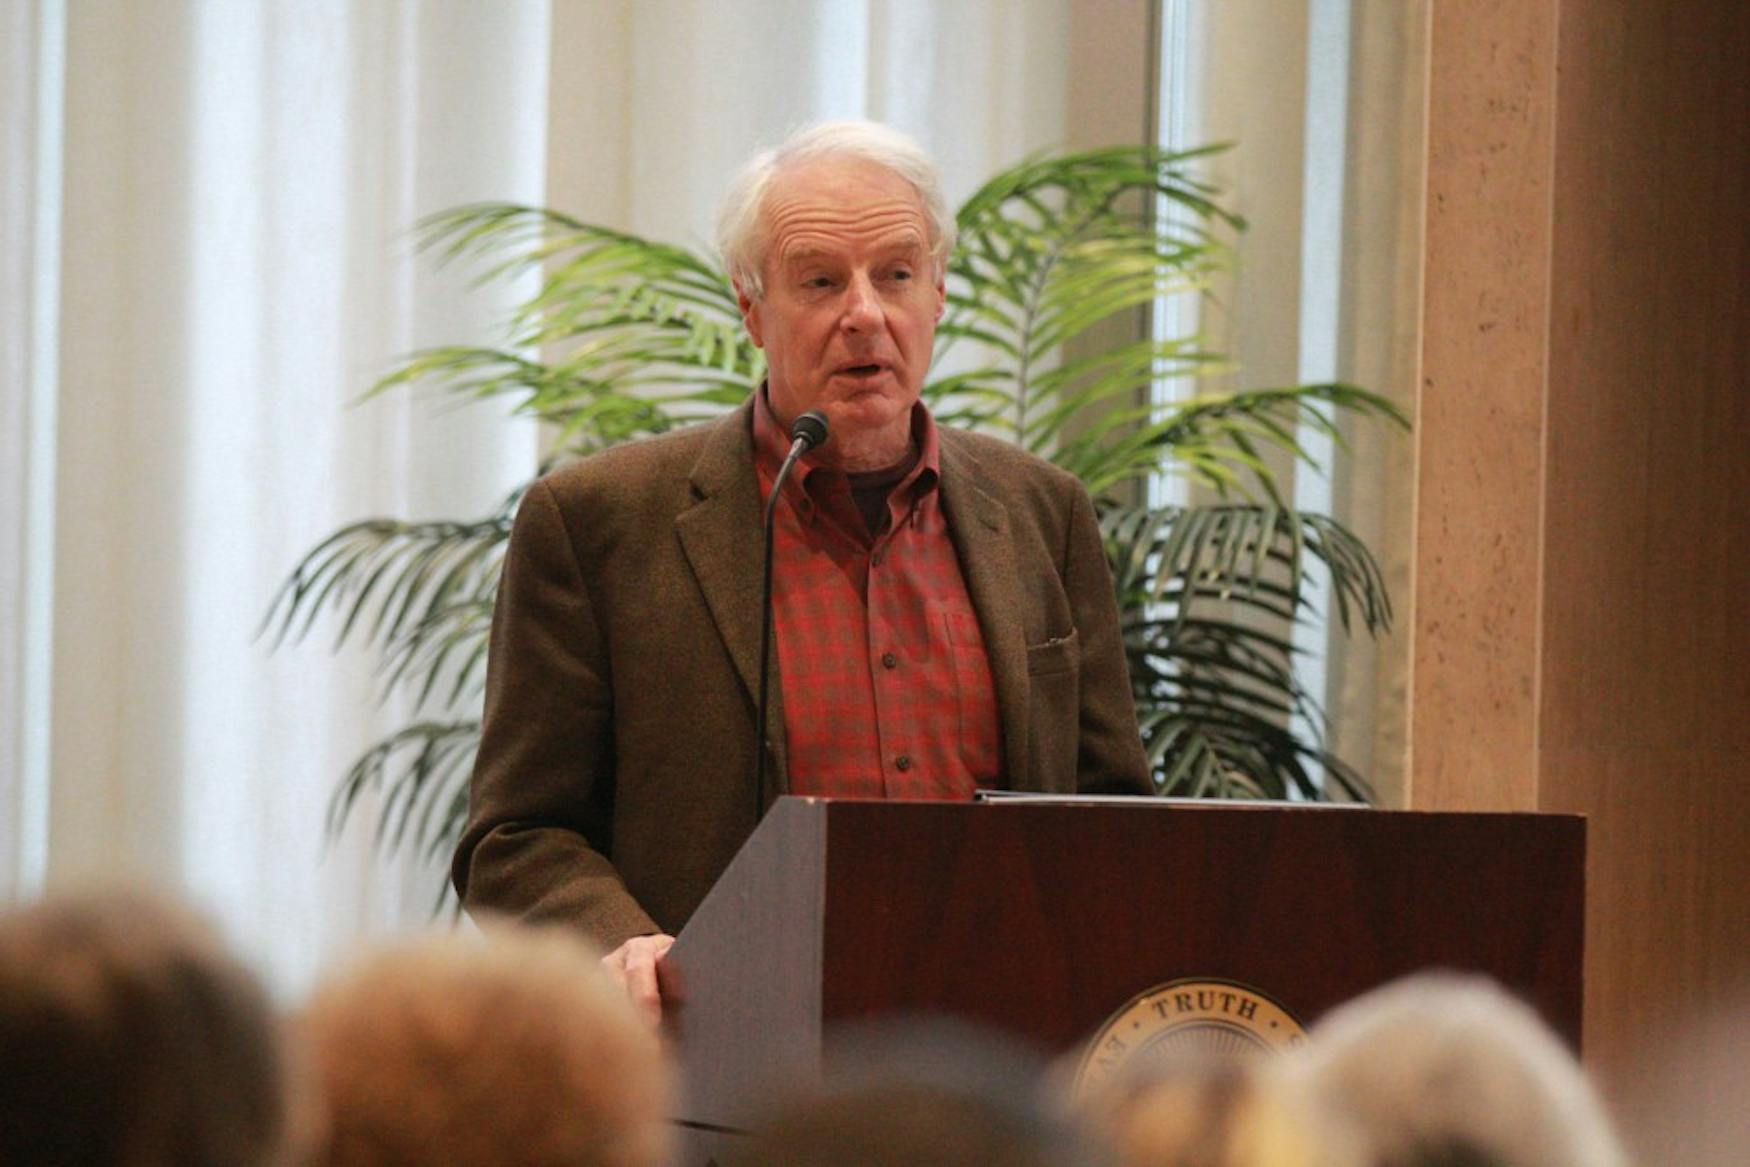 Adam Hochschild spoke about World War I and the illusions that allowed it to begin easily on Monday in the Rapaporte Treasure Hall.